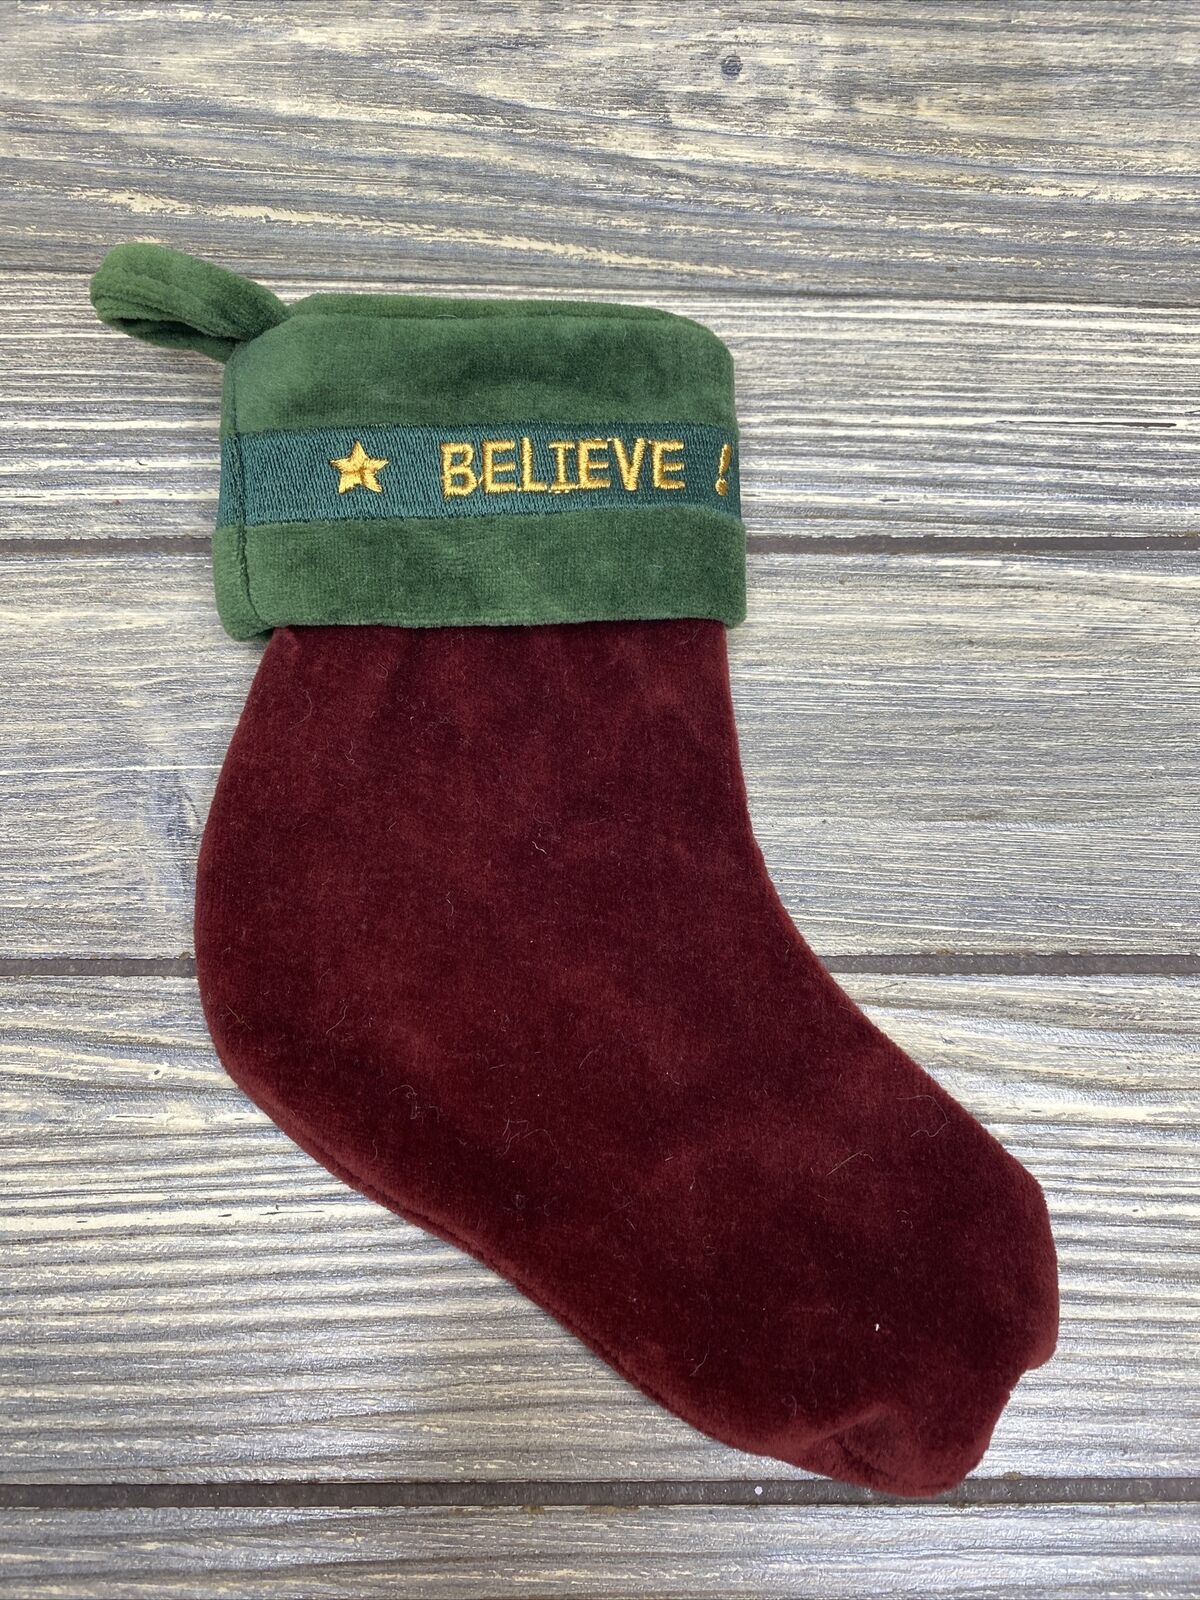 Vintage Green Maroon Christmas Stocking Gold Believe 8”